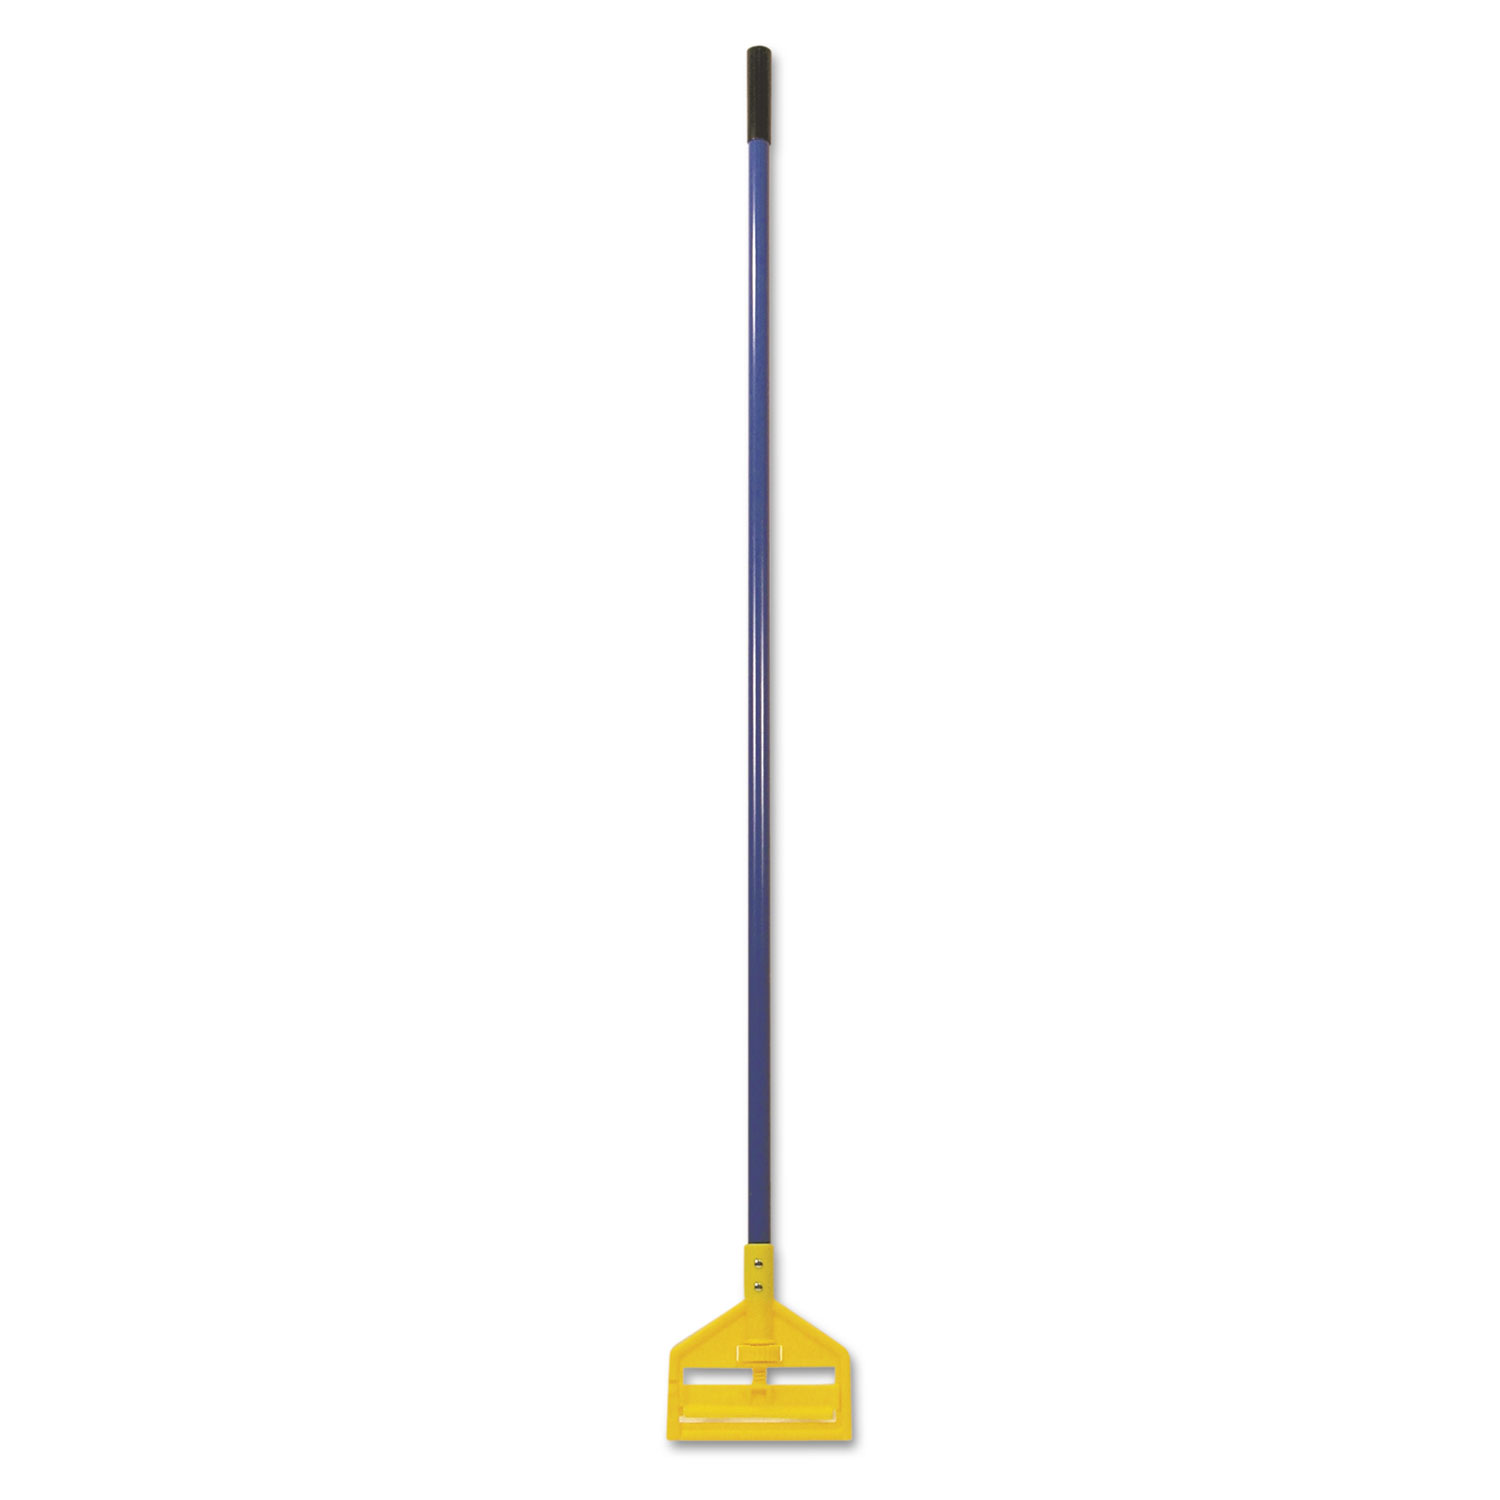  Rubbermaid Commercial FGH14600BL00 Invader Fiberglass Side-Gate Wet-Mop Handle, 60, Blue/Yellow (RCPH146BLU) 